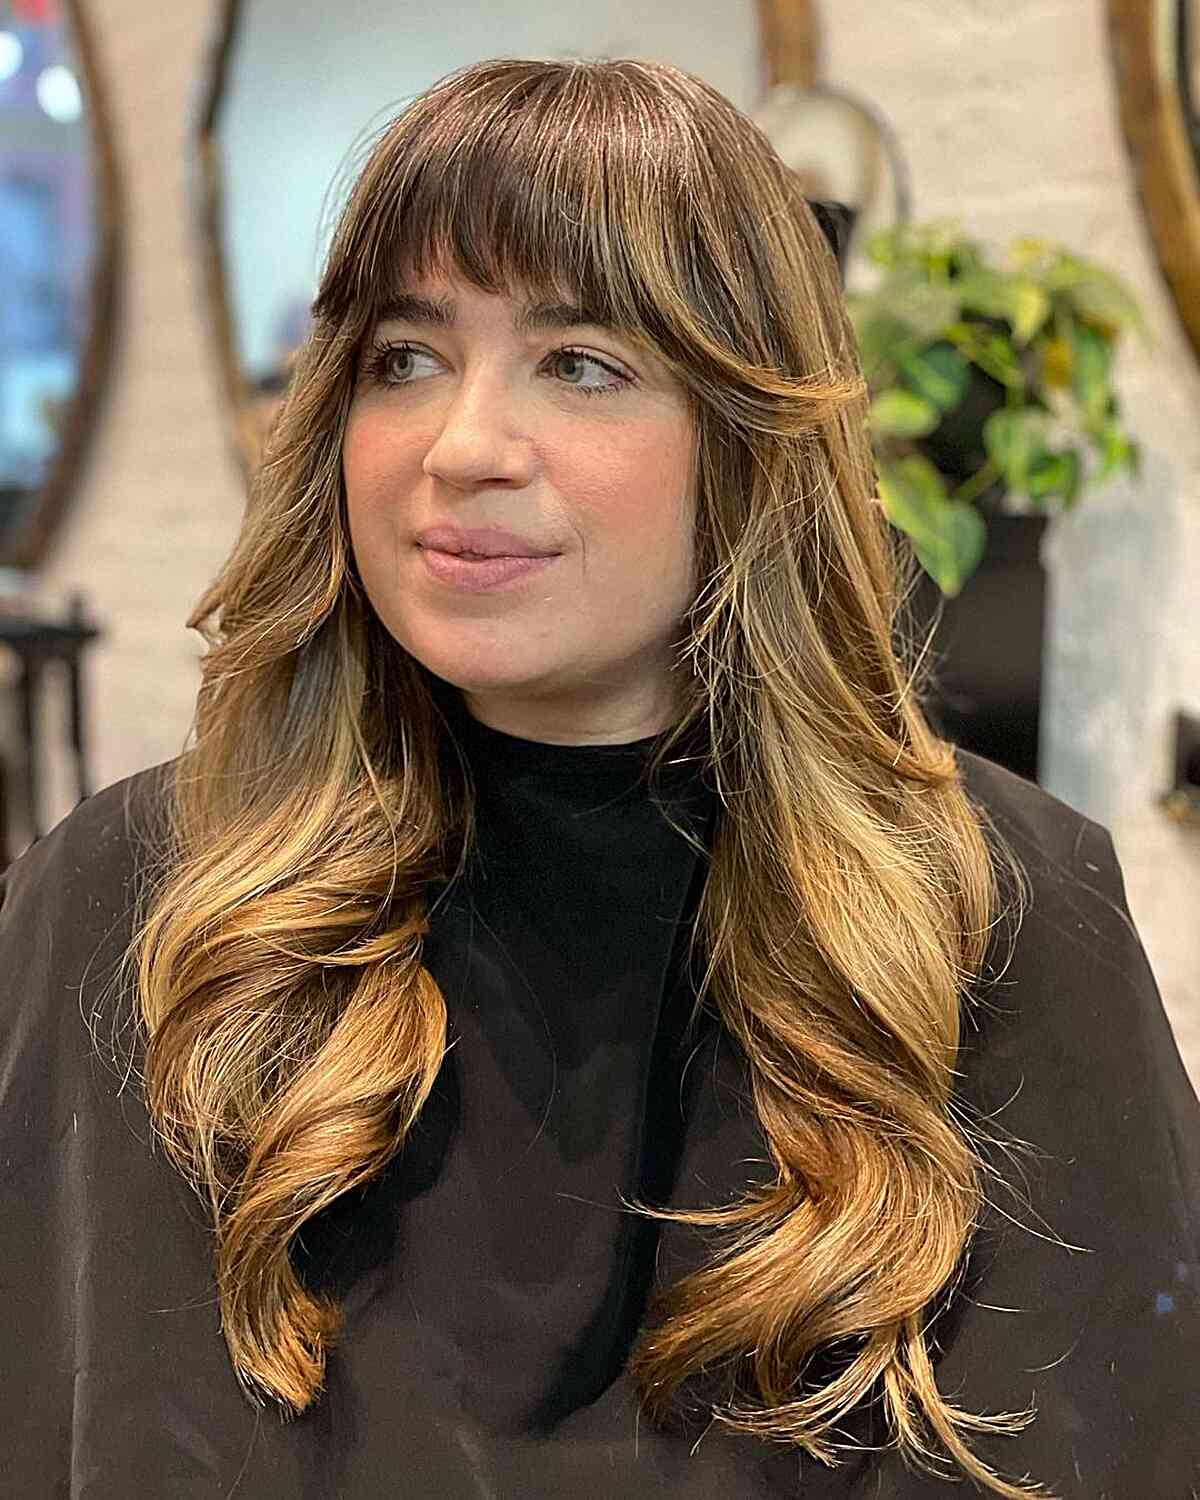 Mid-Long Blonde Wavy Layers with French Front Bangs